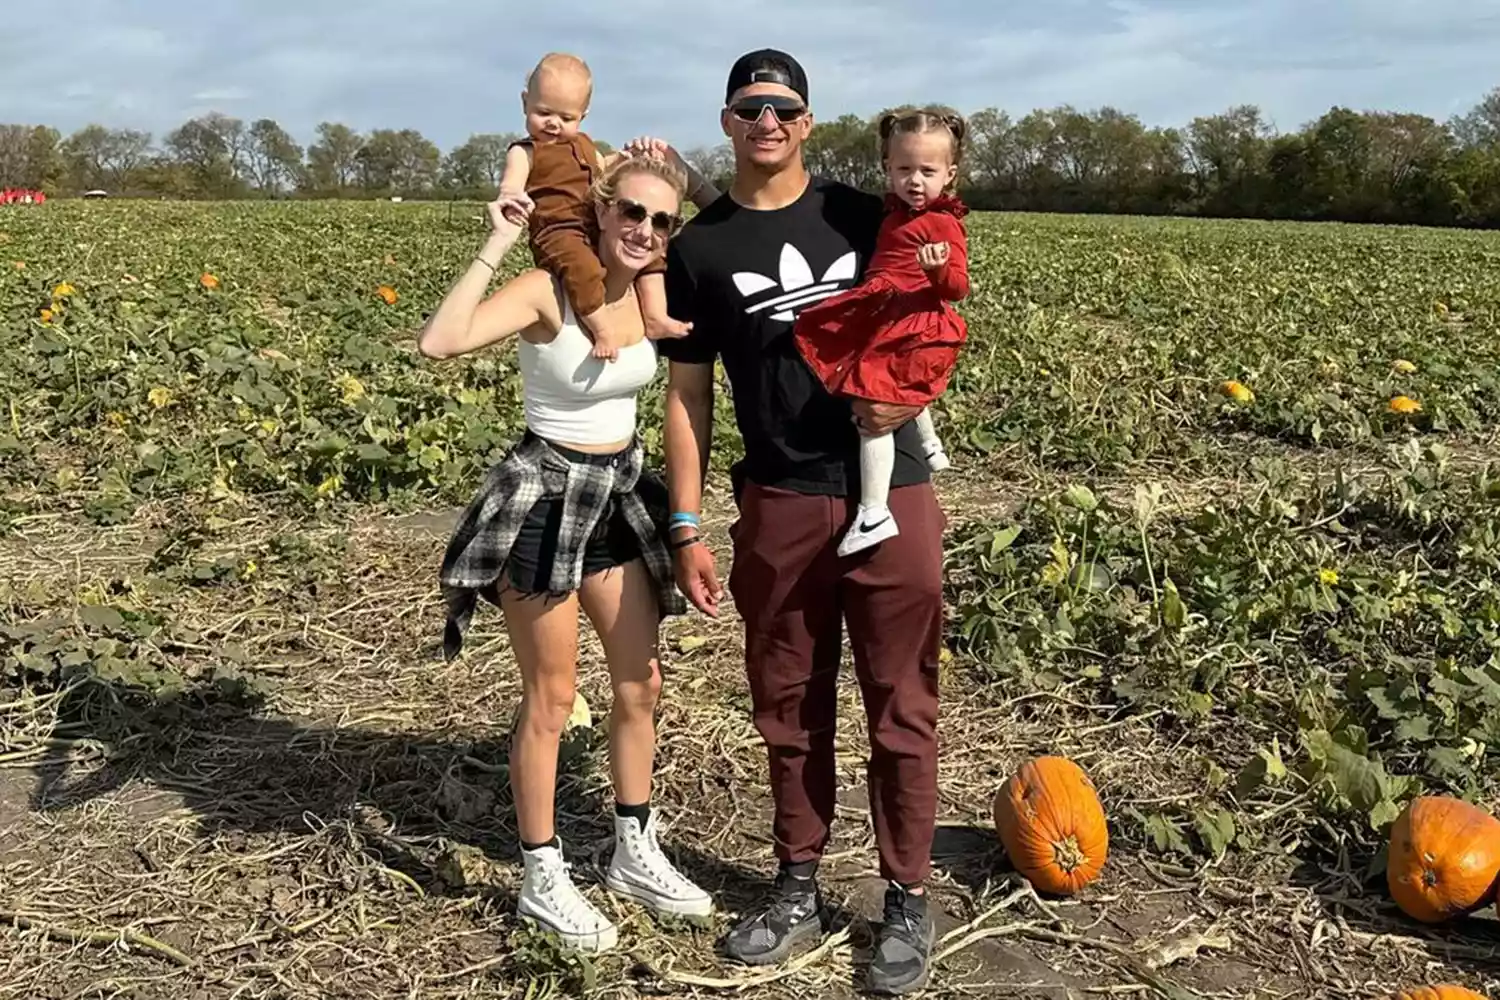 Patrick and Brittany Mahomes Take Their 2 Kids for Fall Fun at Pumpkin Patch